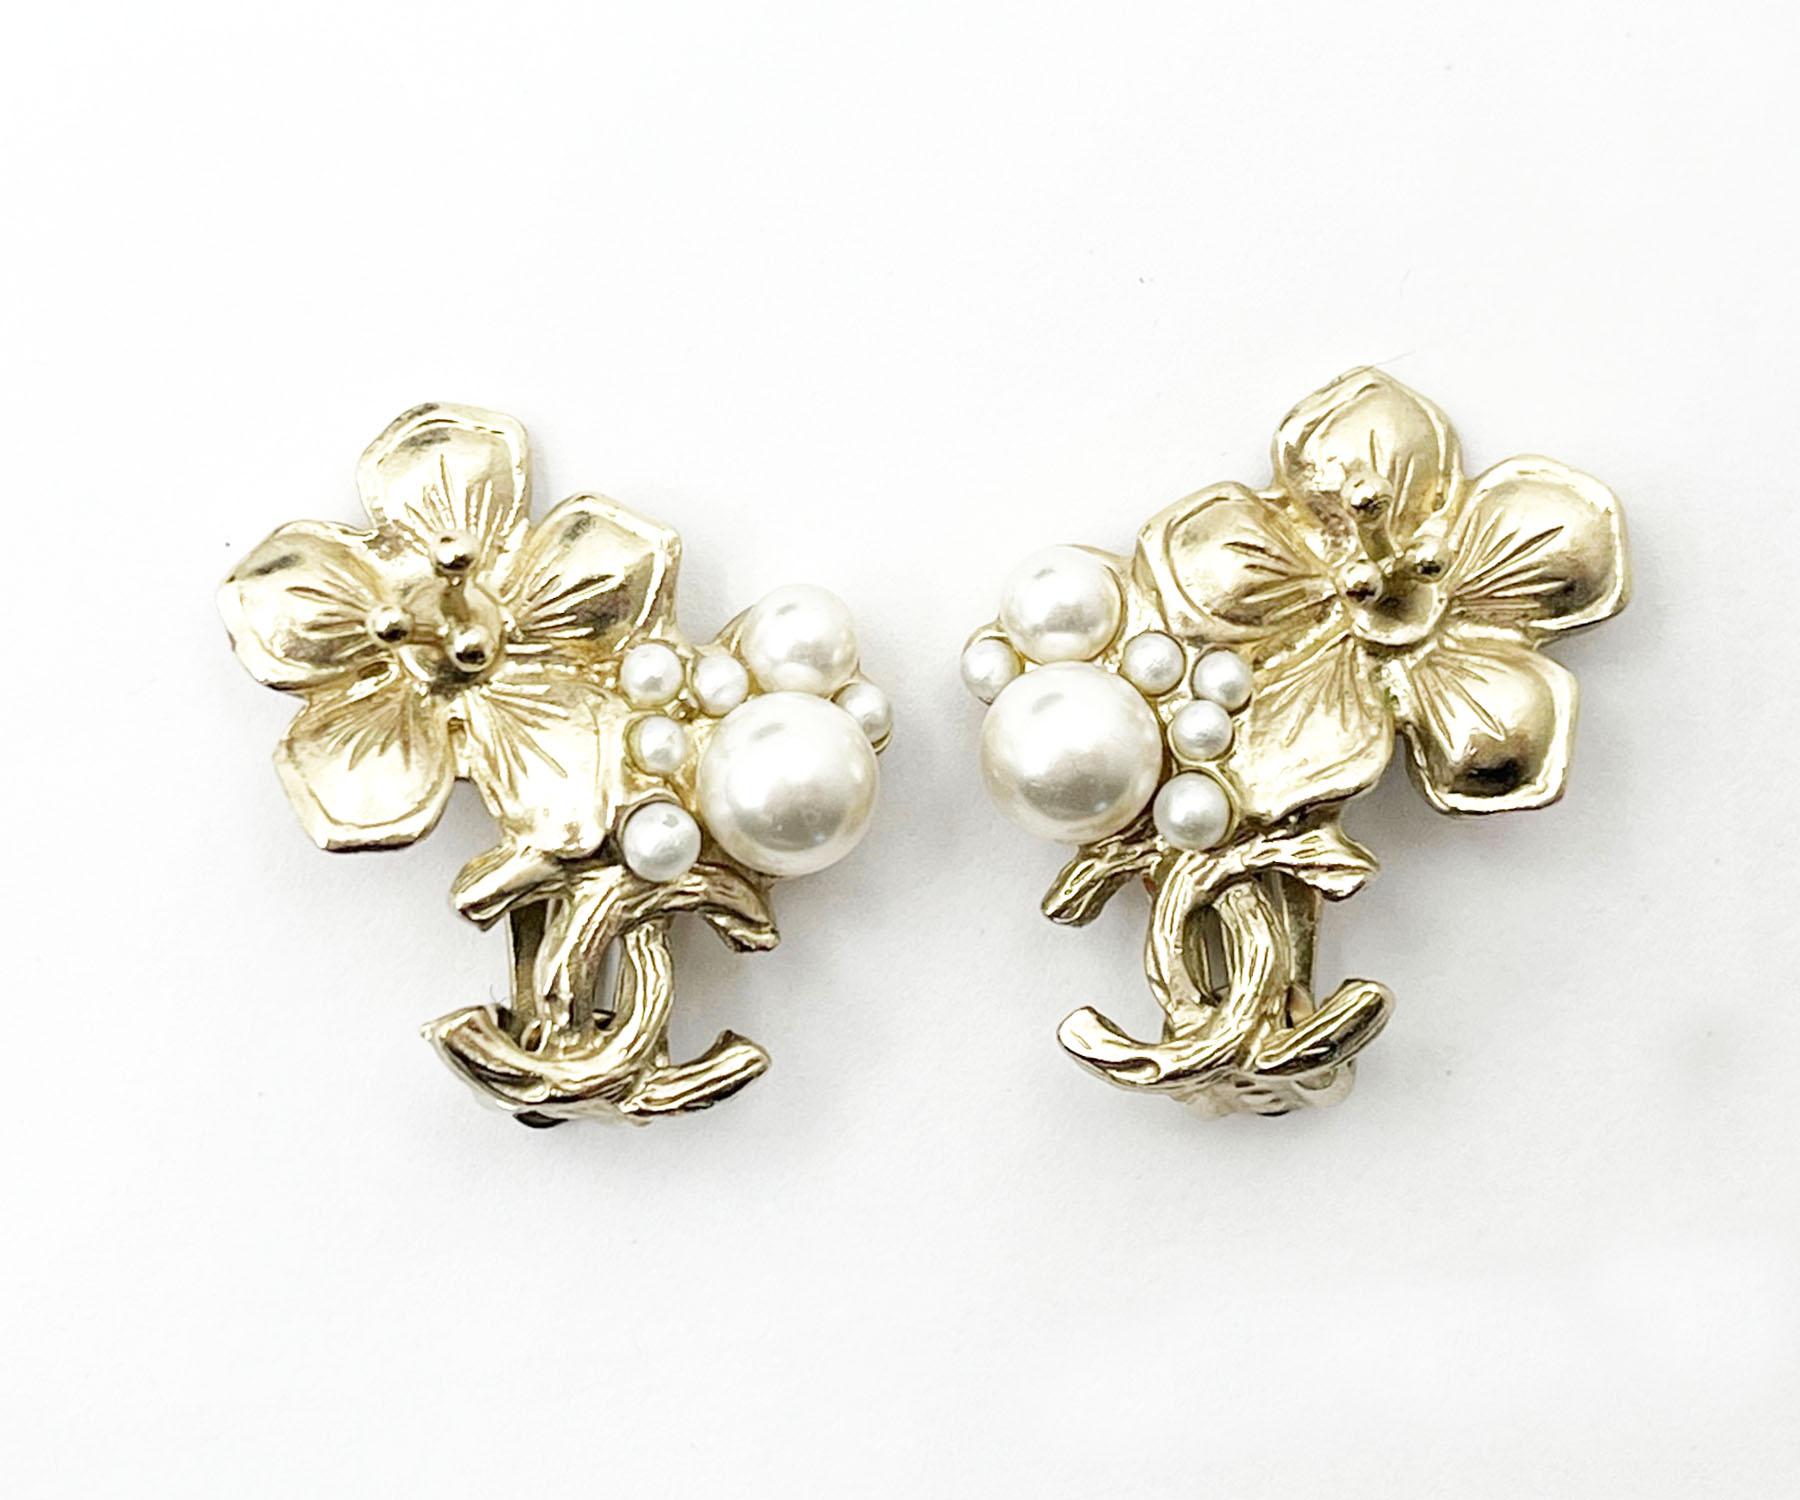 Chanel Light Gold CC Flower Pearl Clip on Earrings

*Marked 11
*Made in France
*Comes with the original box

-It is approximately 1